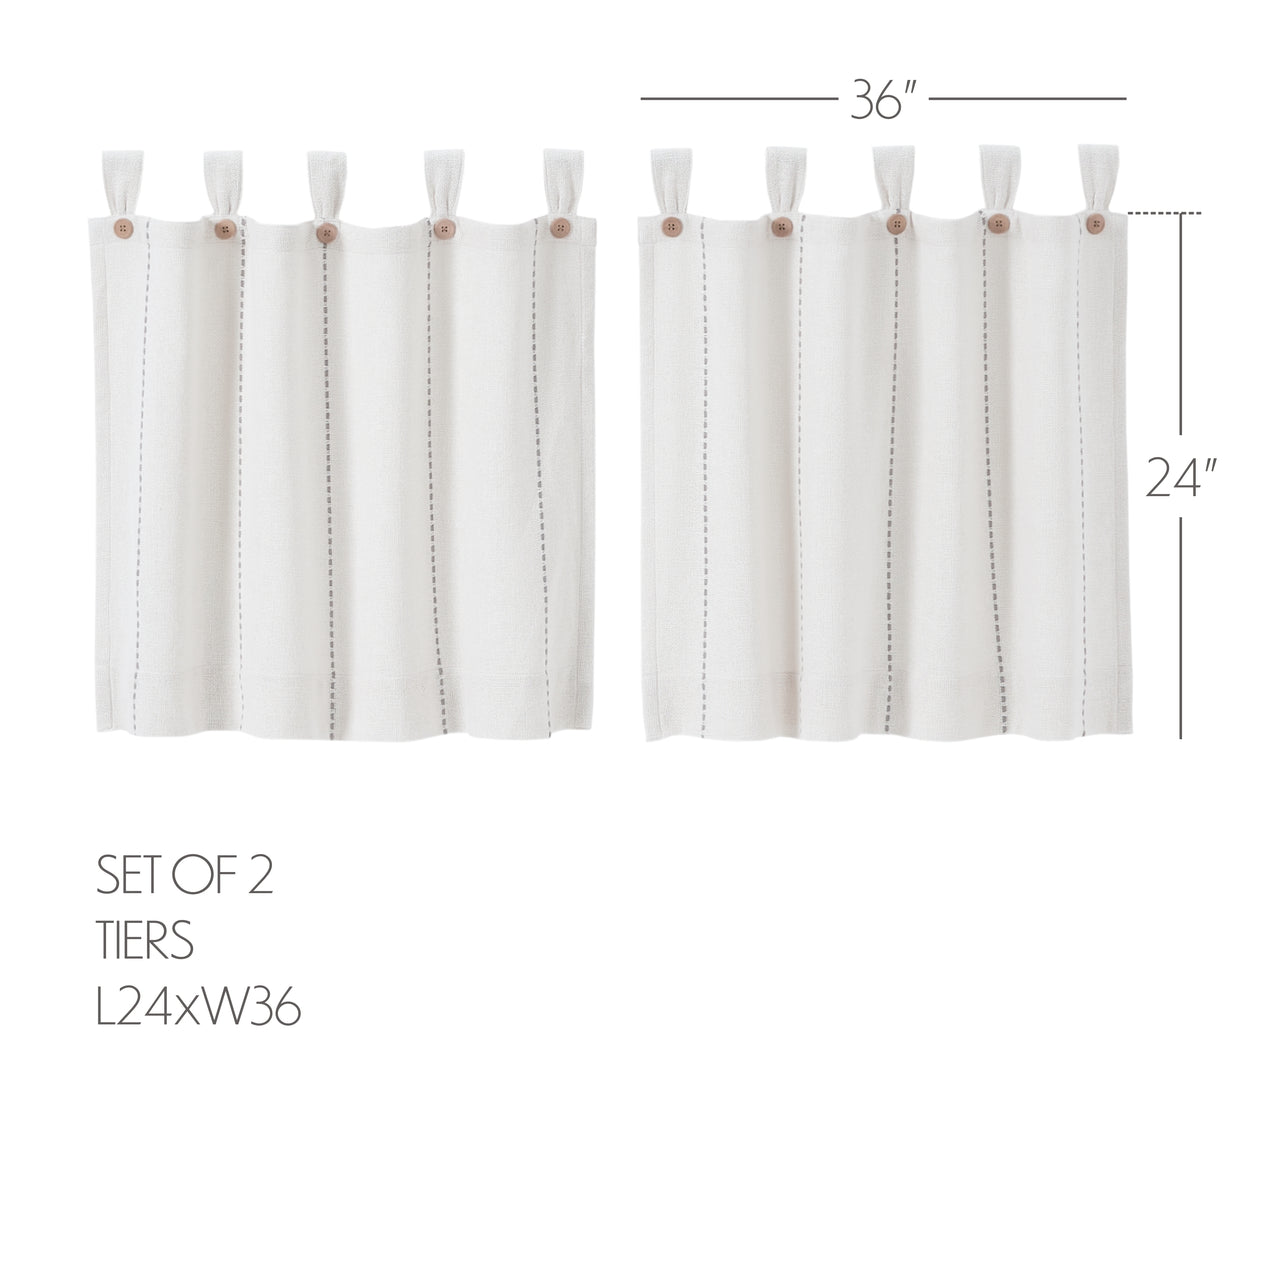 Stitched Burlap White Tier Curtain Set of 2 L24xW36